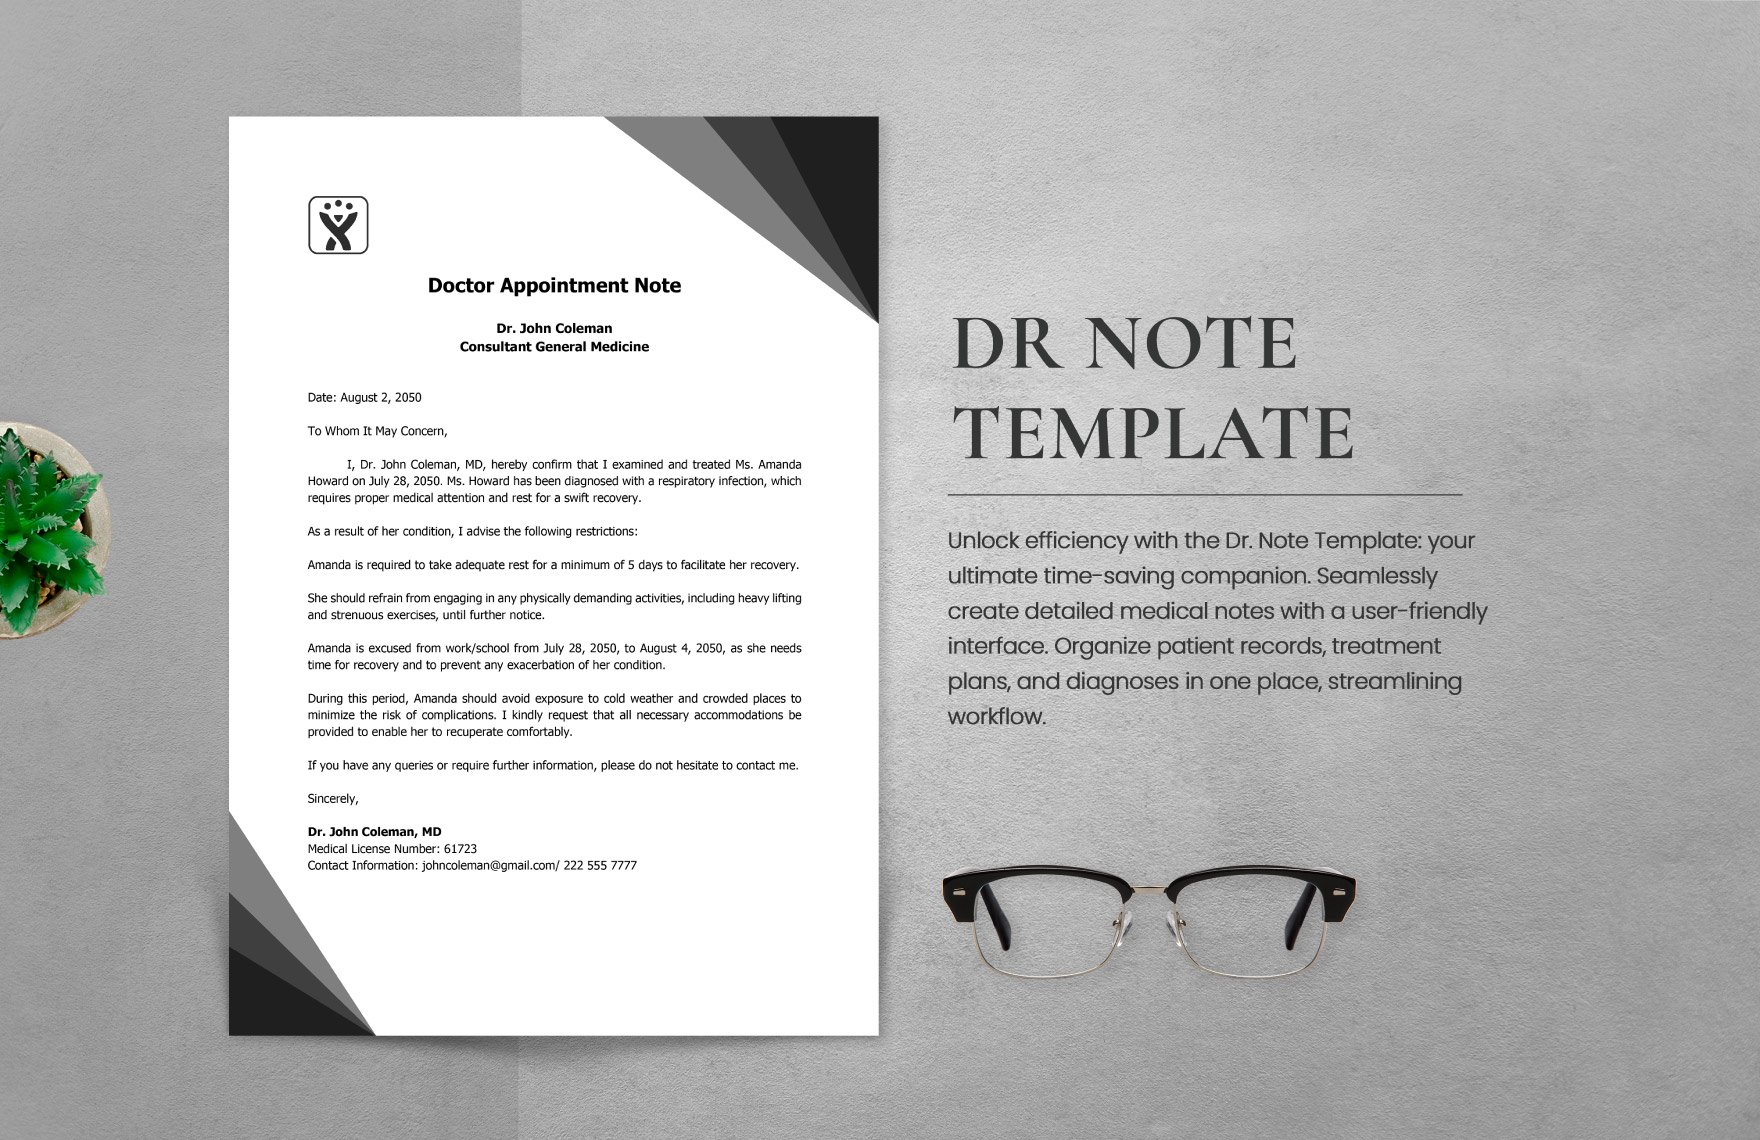 dr-note-template